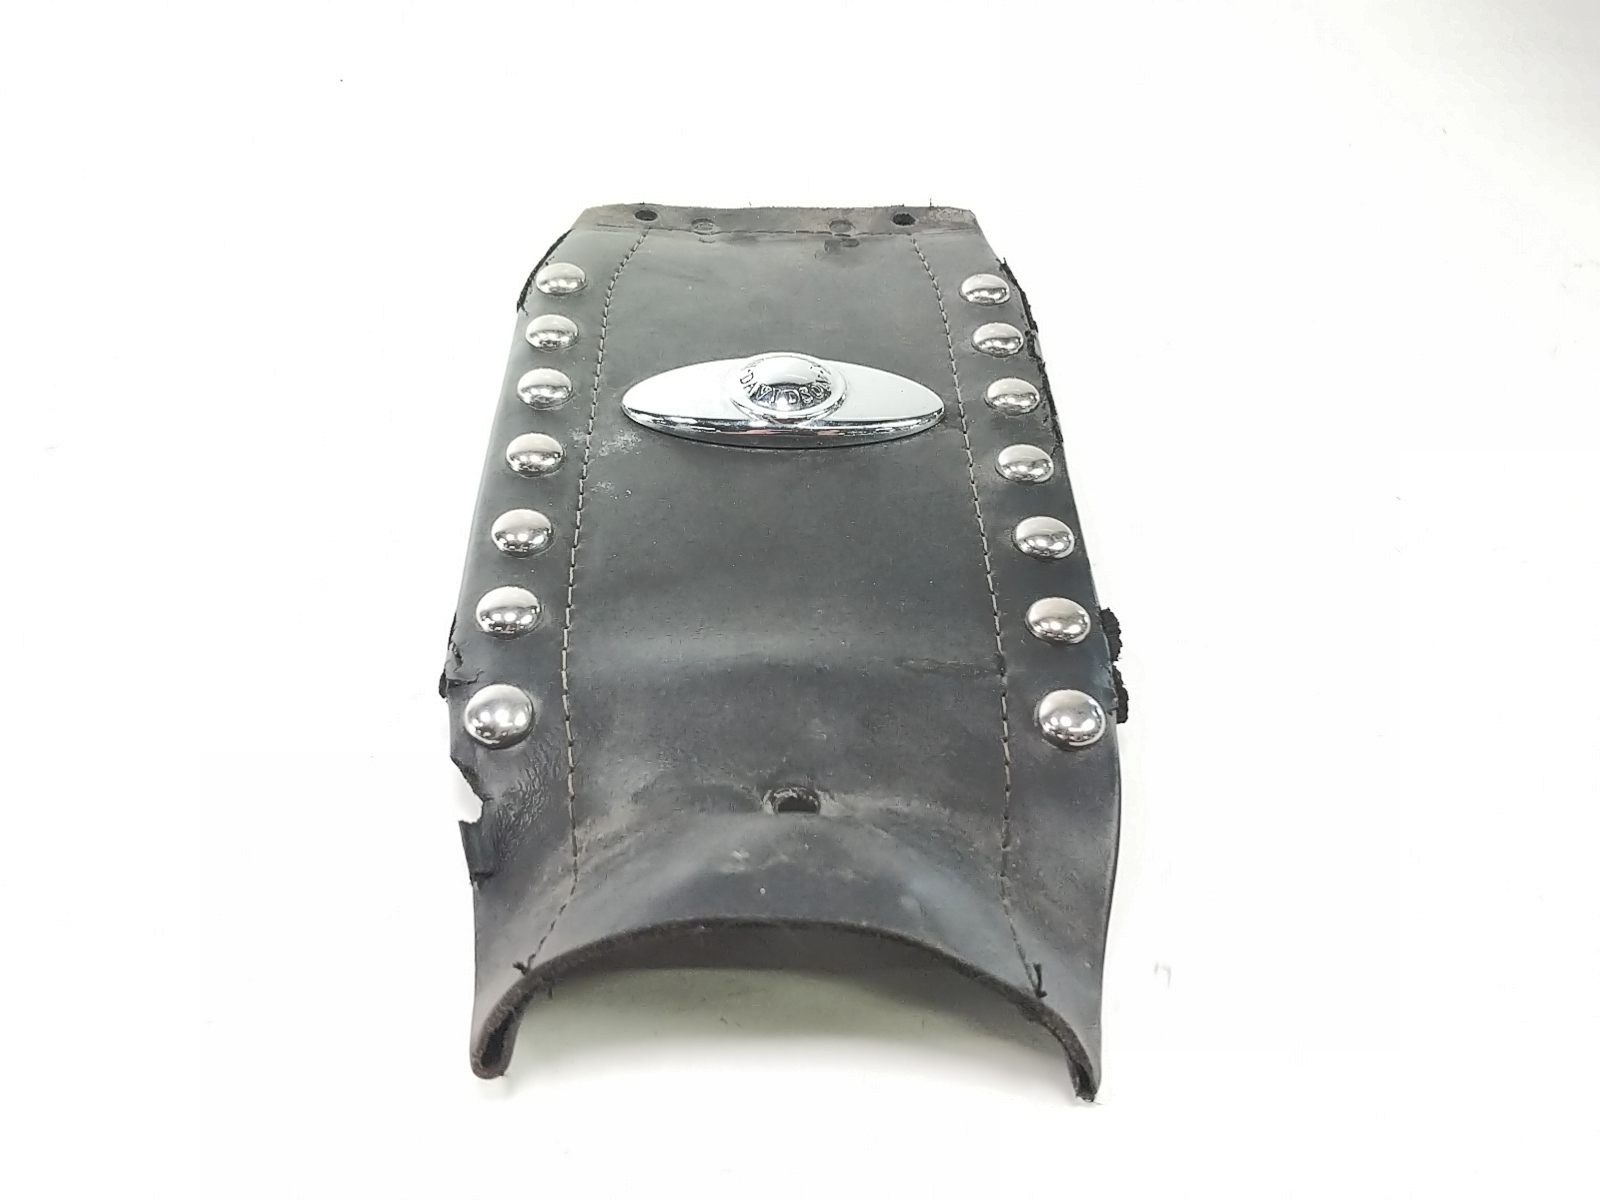 02 Harley Heritage Softail FLSTCI Gas Fuel Tank Leather Cover 91129-01